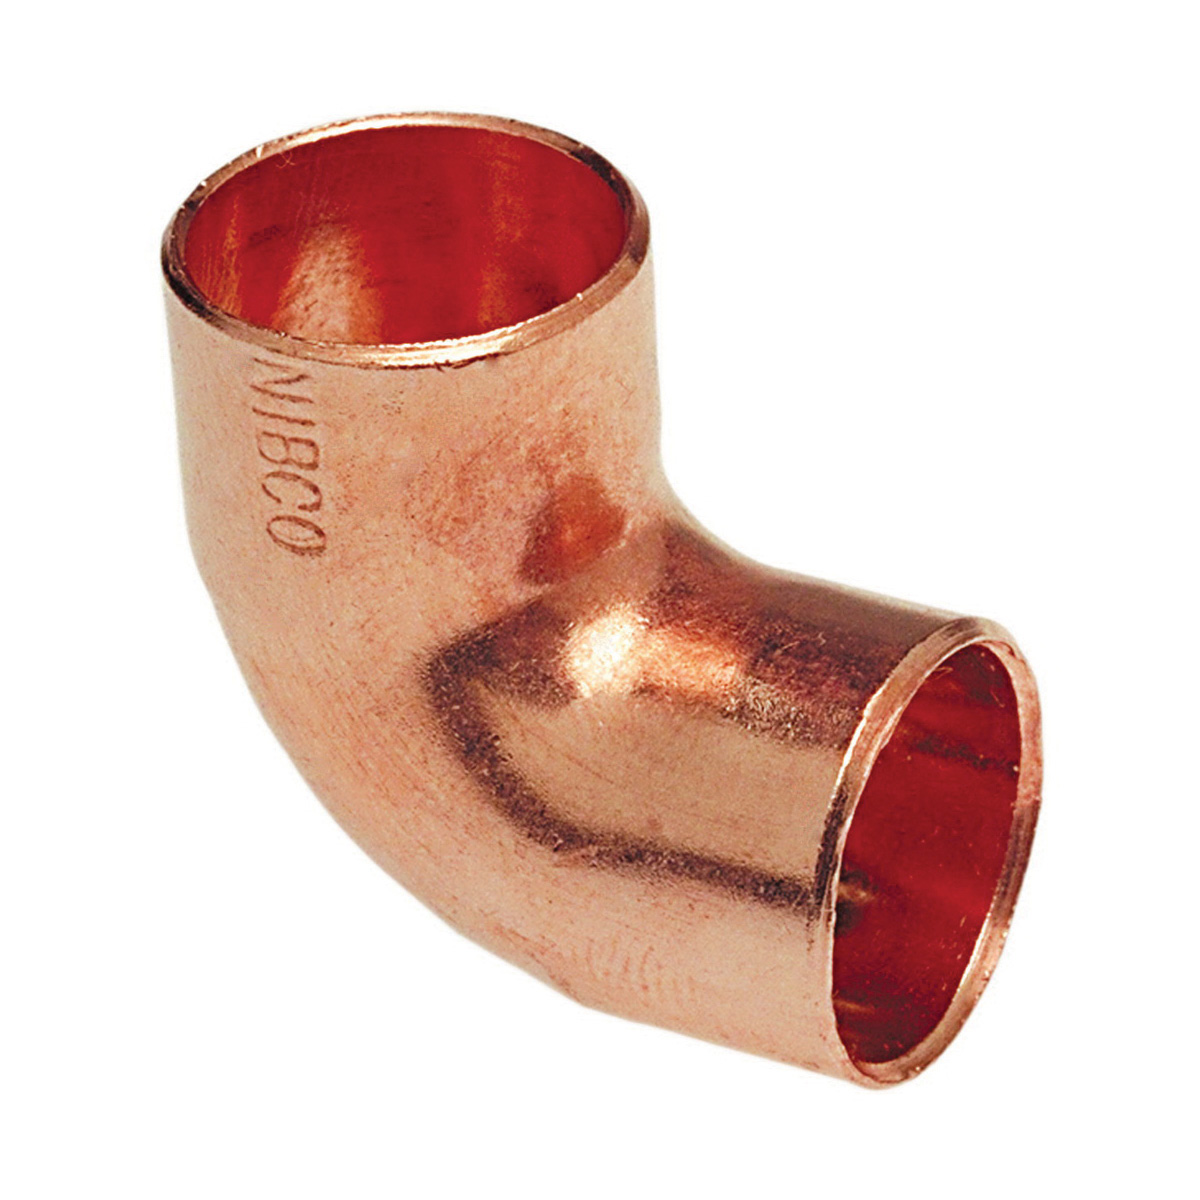 NIBCO® 9055950 607 Elbow, 1-1/4 in Nominal, C End Style, Copper, Domestic